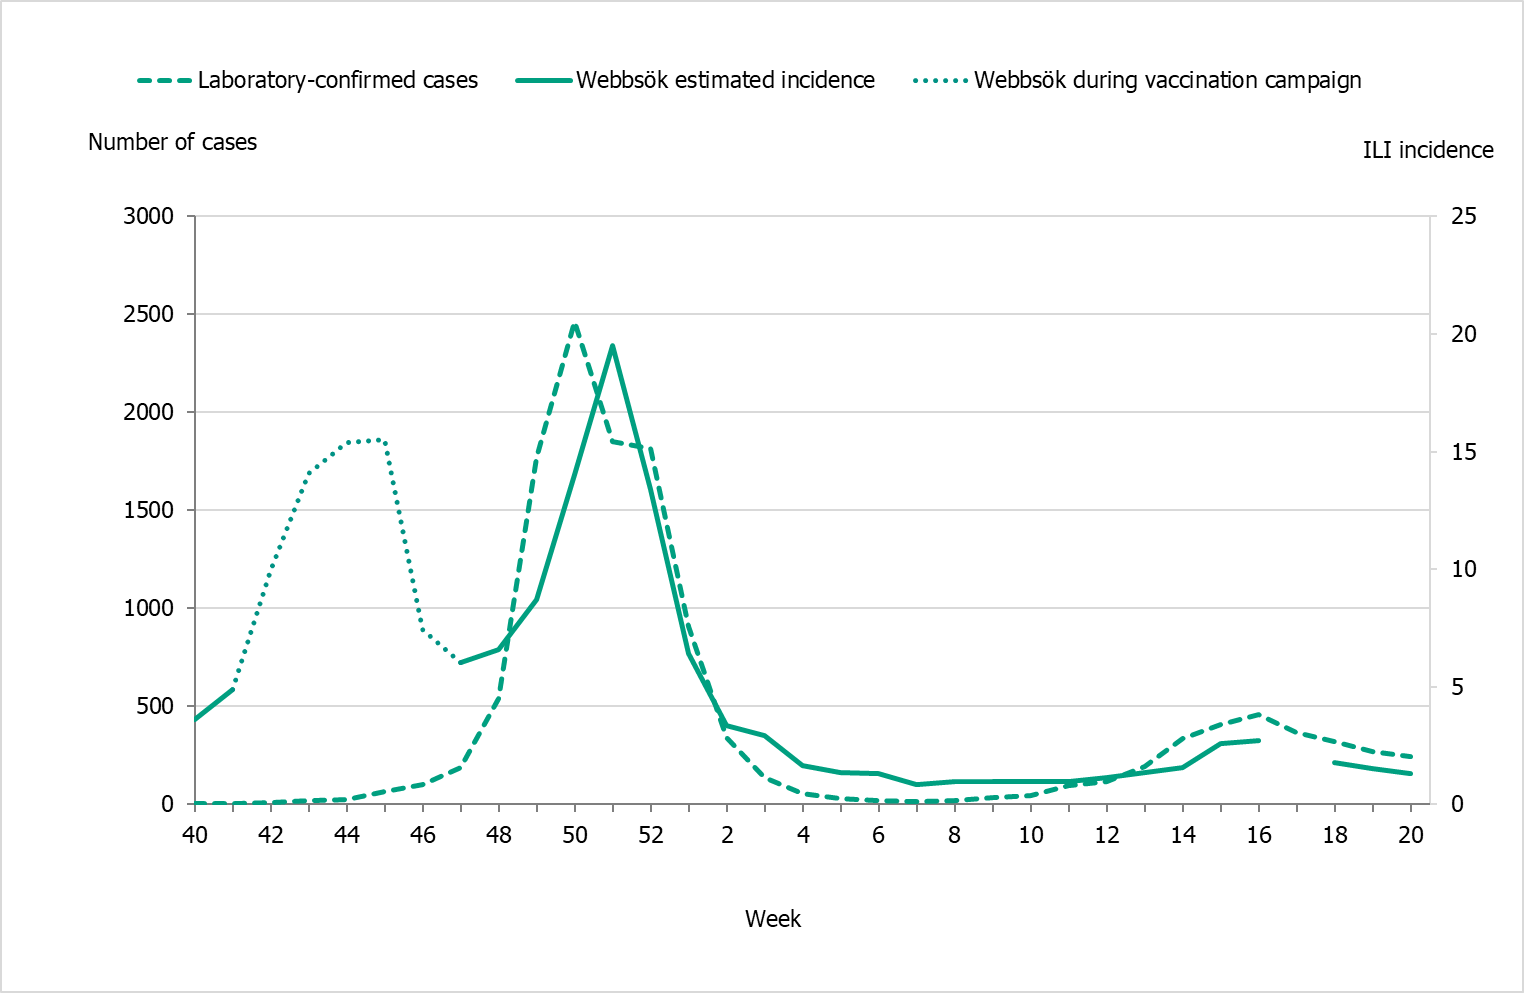 Webbsök and laboratory-confirmed cases are closely matched after week 47.